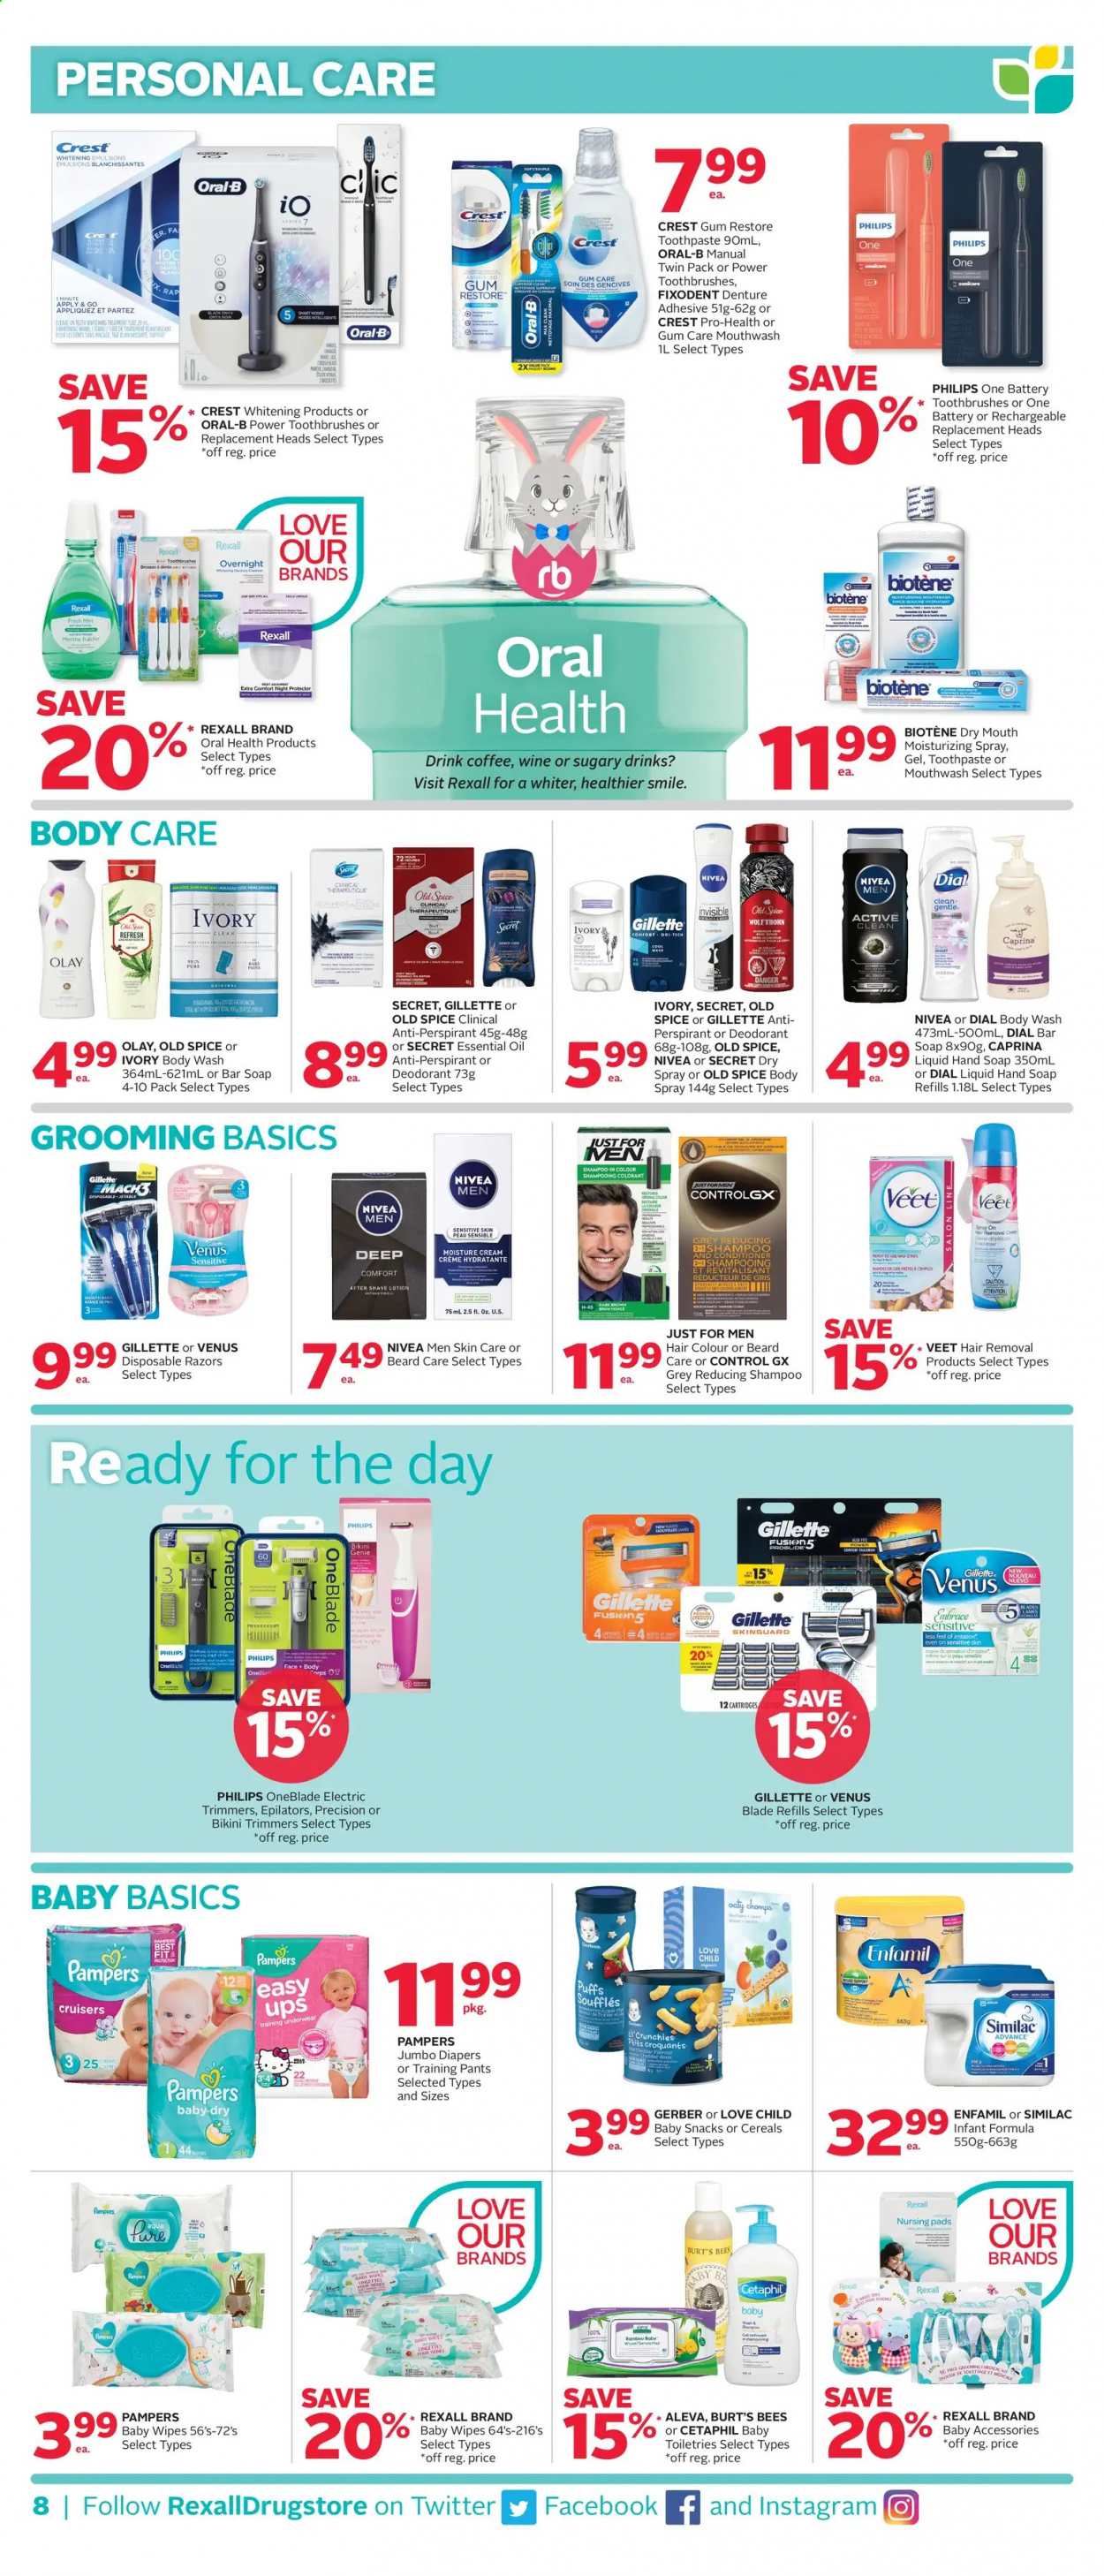 thumbnail - Rexall Flyer - April 02, 2021 - April 08, 2021 - Sales products - snack, Gerber, cereals, puffs, spice, coffee, Enfamil, Similac, wipes, pants, baby wipes, nappies, baby pants, Omo, body wash, hand soap, soap bar, Dial, soap, Biotene, toothpaste, mouthwash, Fixodent, Crest, Olay, conditioner, hair color, body lotion, body spray, after shave, anti-perspirant, Venus, hair removal, Veet, disposable razor, Gillette, shampoo, Pampers, Nivea, Old Spice, Oral-B, deodorant. Page 8.